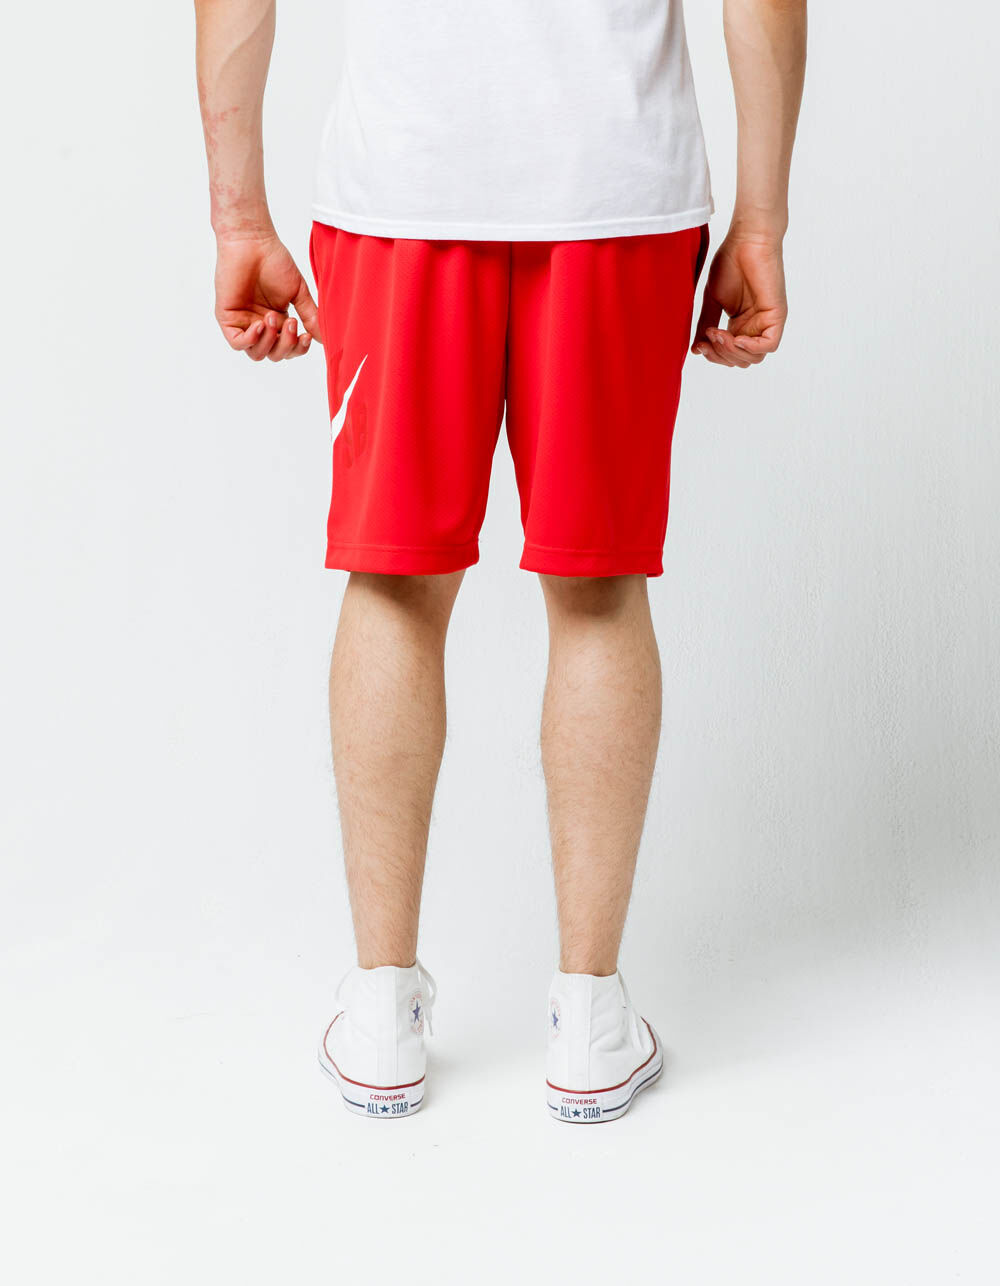 NIKE SB Dri-FIT Sunday Red Mens Shorts - RED | Tillys